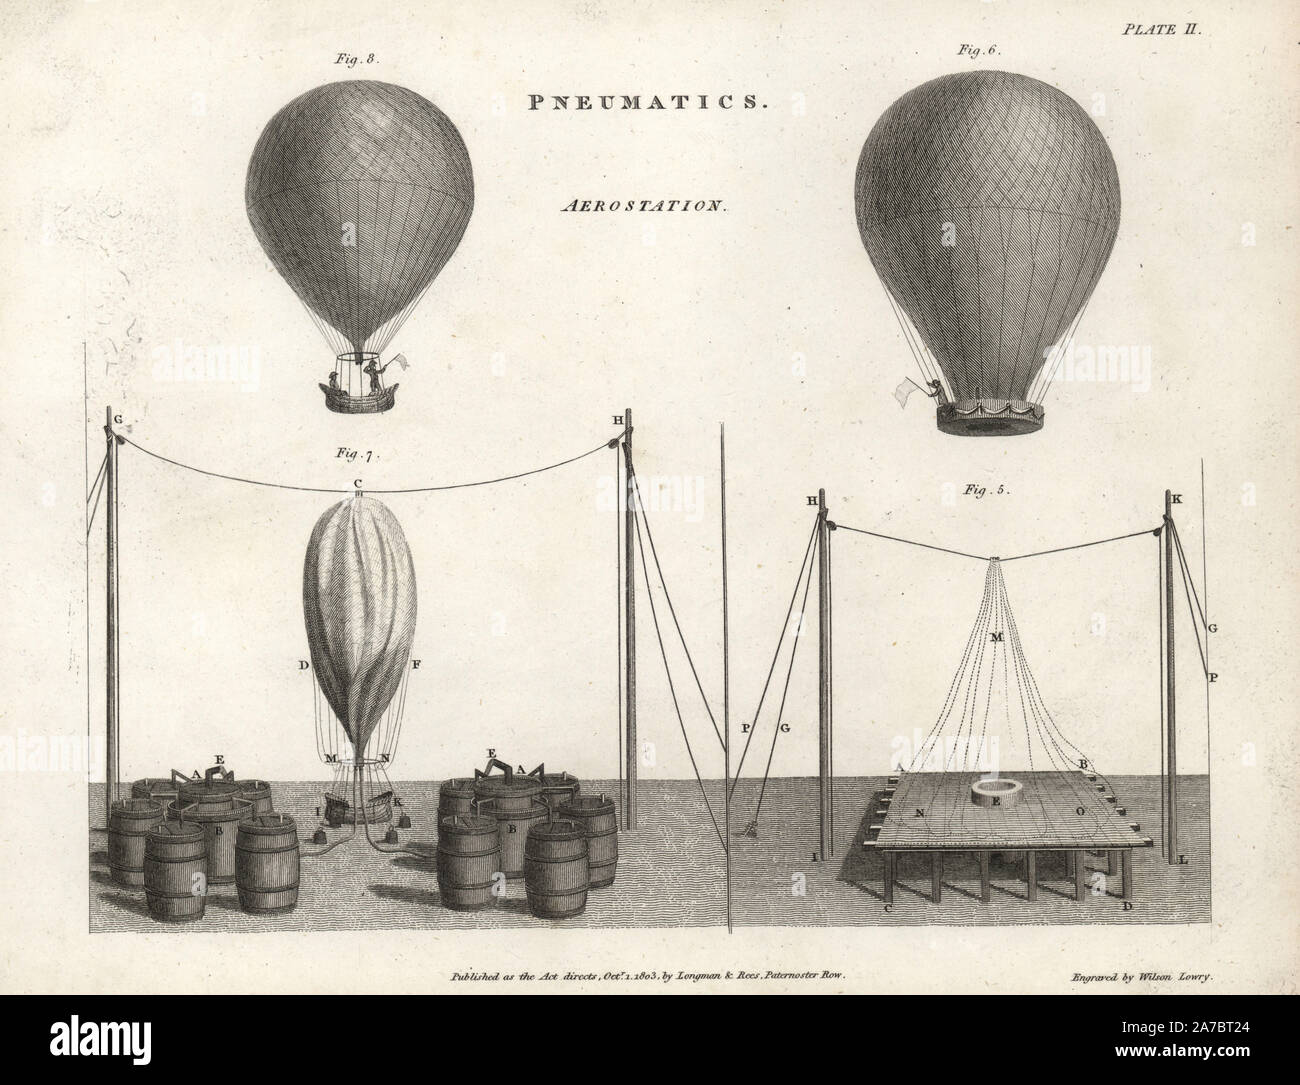 Pneumatics of aerostation, the science of operating lighter-than-air aircraft, with two hot-air balloons and aeronauts. Copperplate engraving by Wilson Lowry from Abraham Rees' Cyclopedia or Universal Dictionary of Arts, Sciences and Literature, Longman, Hurst, Rees, Orme and Brown, London, 1820. Stock Photo